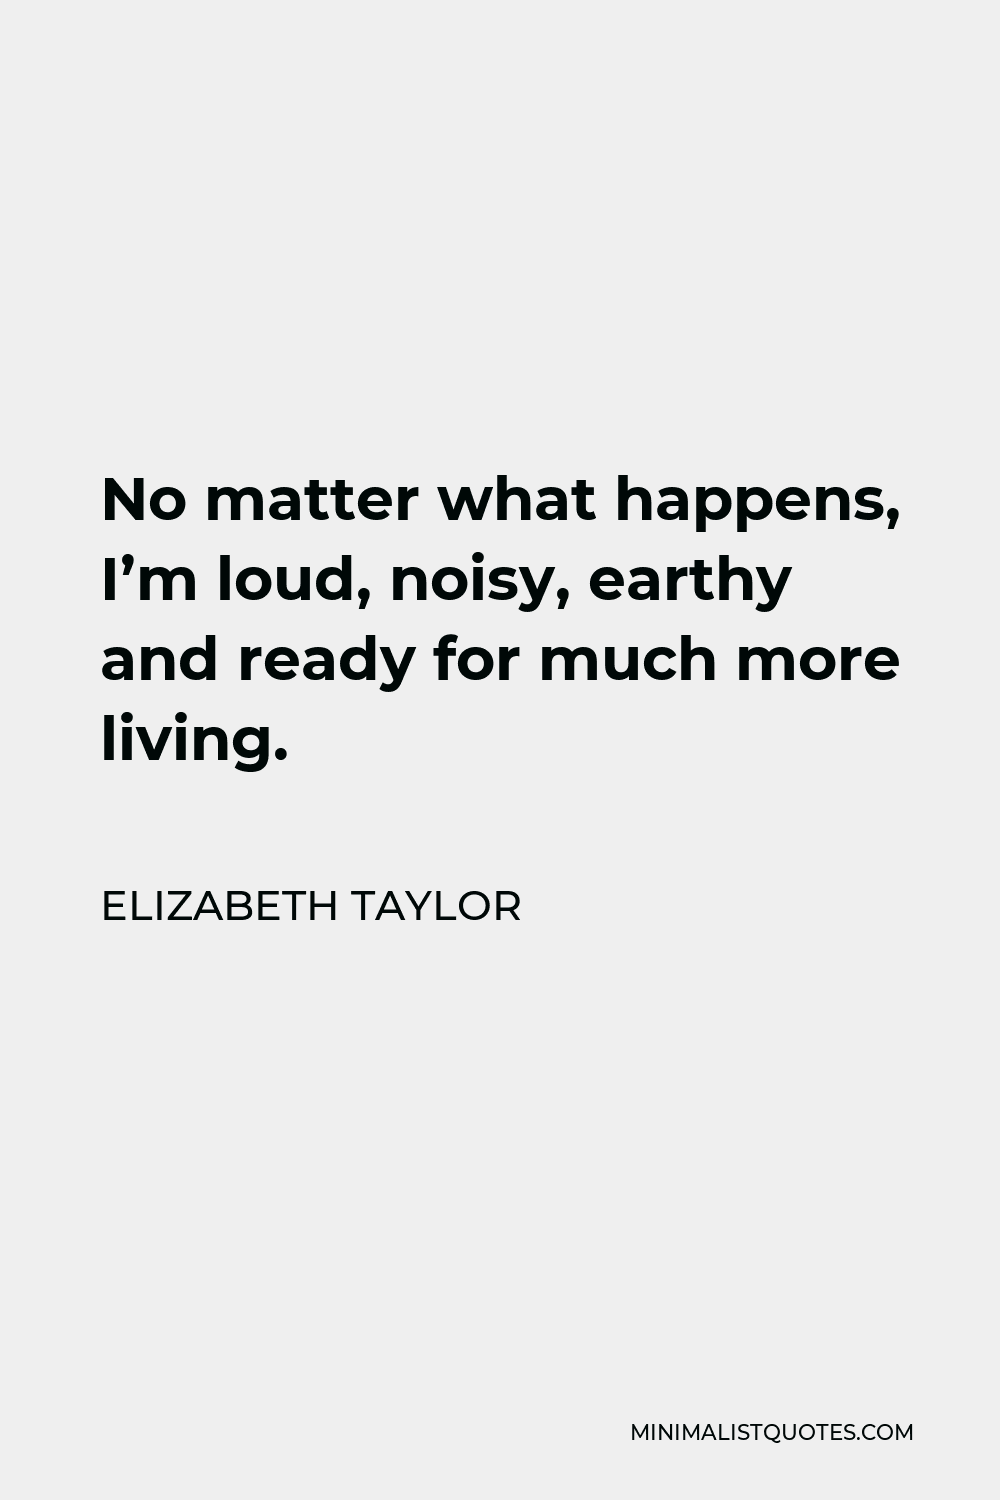 Elizabeth Taylor Quote - No matter what happens, I’m loud, noisy, earthy and ready for much more living.